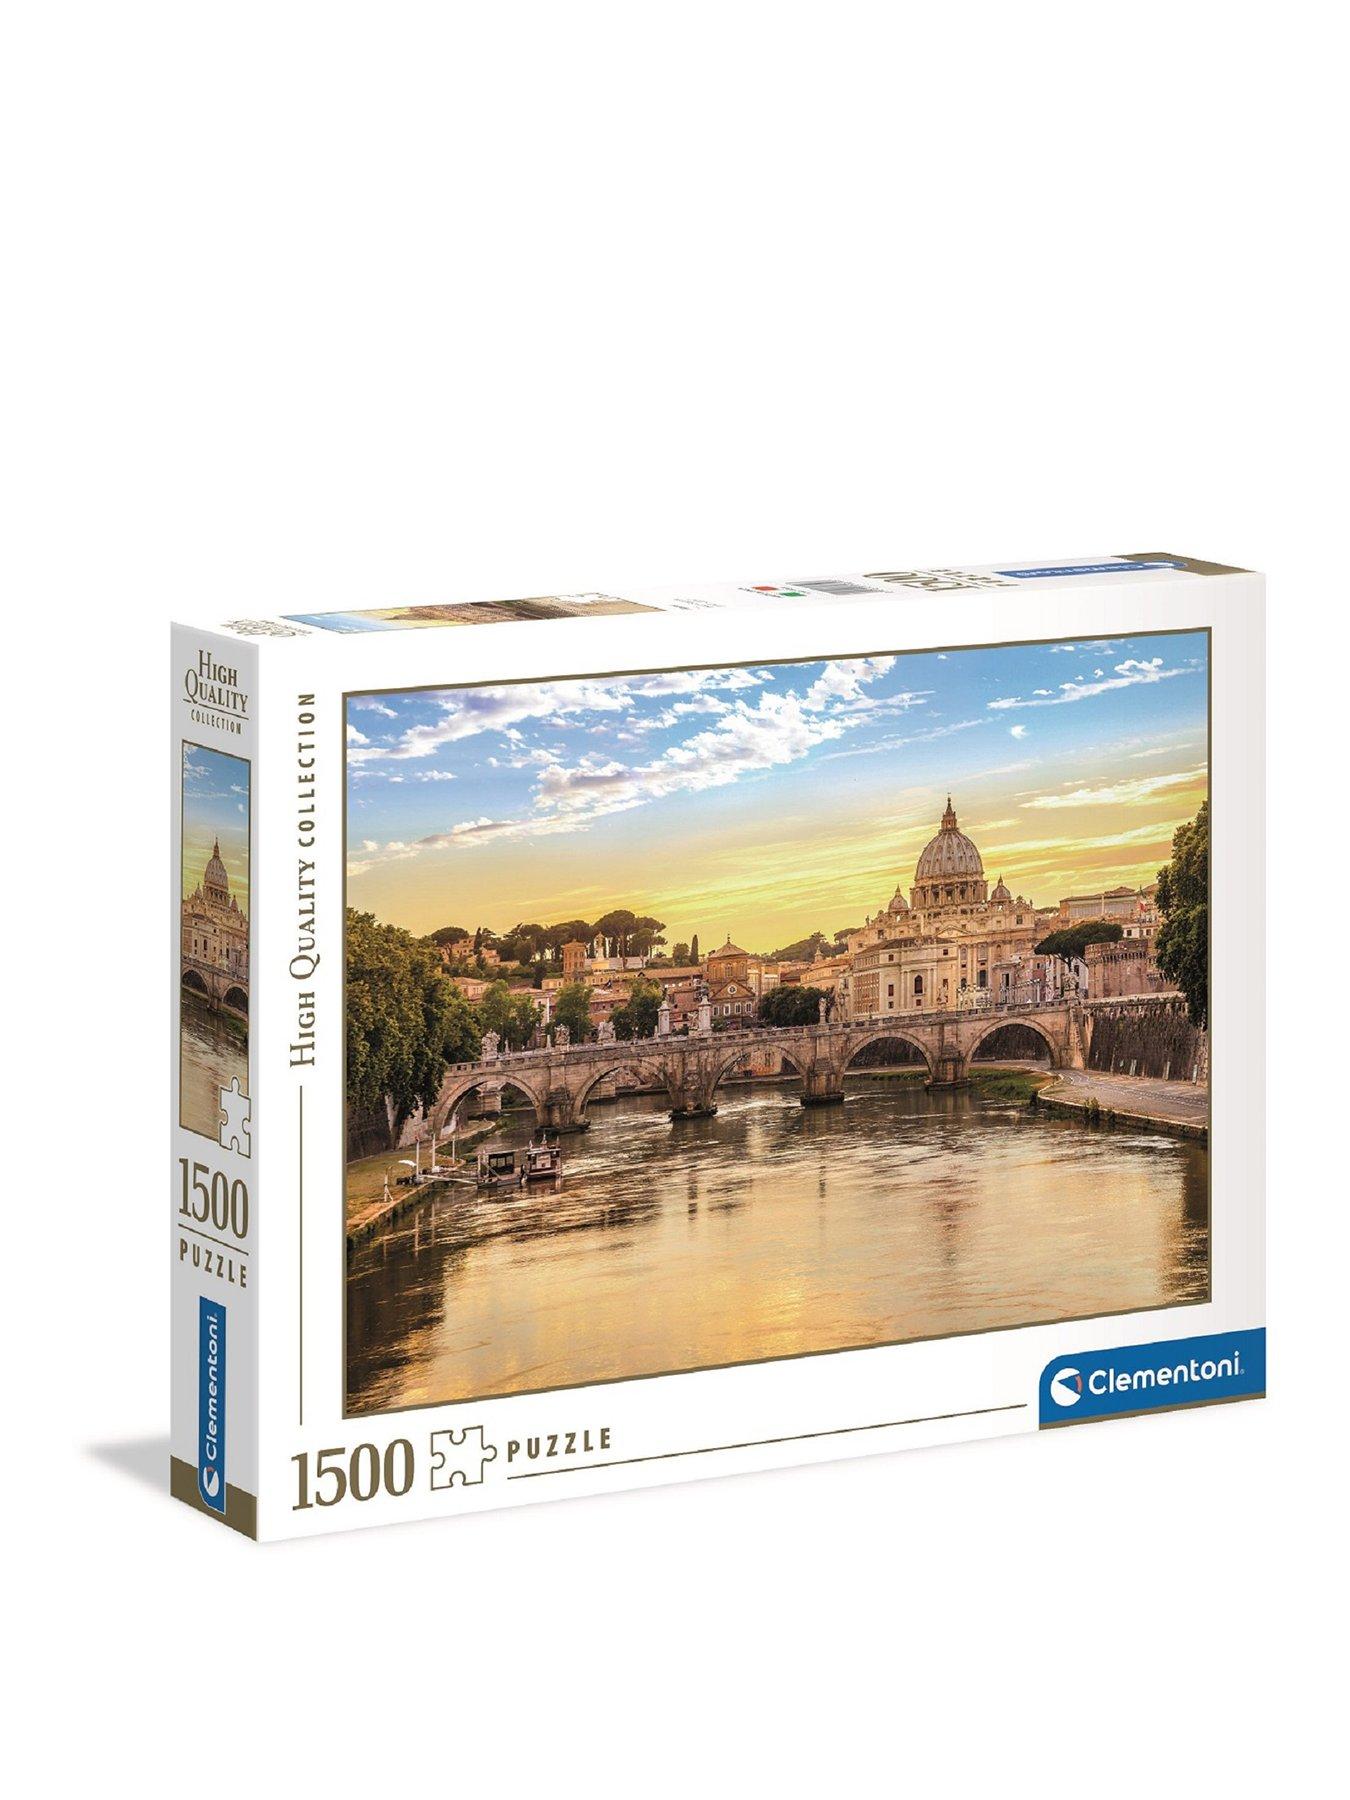 Puzzles for Adults 3000 Piece Every Piece is Unique Virgin Jigsaw Puzzles for Adults